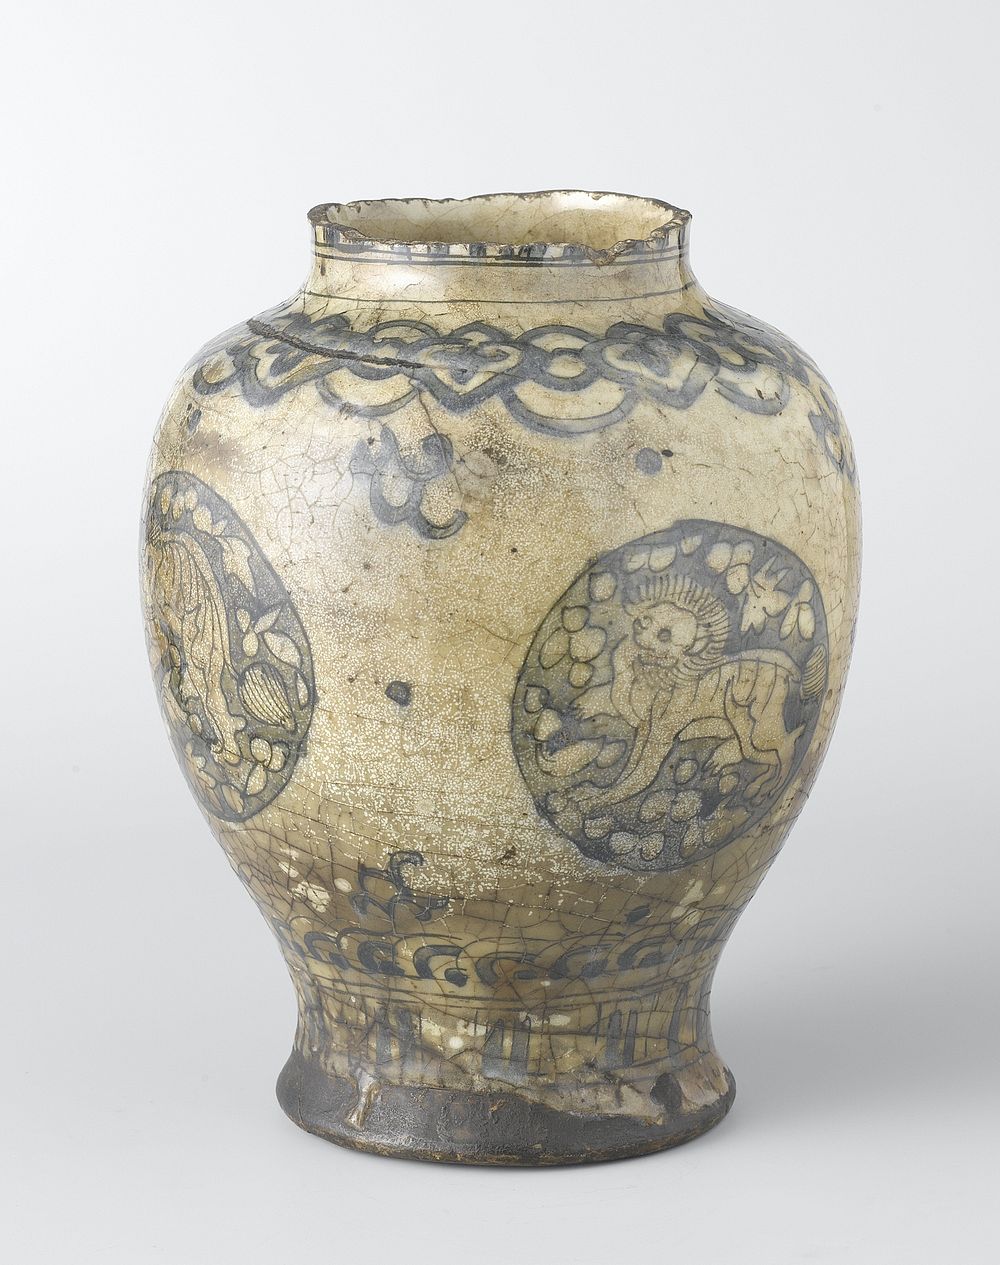 Baluster vase with four medallions with a lion (c. 1600 - c. 1699) by anonymous